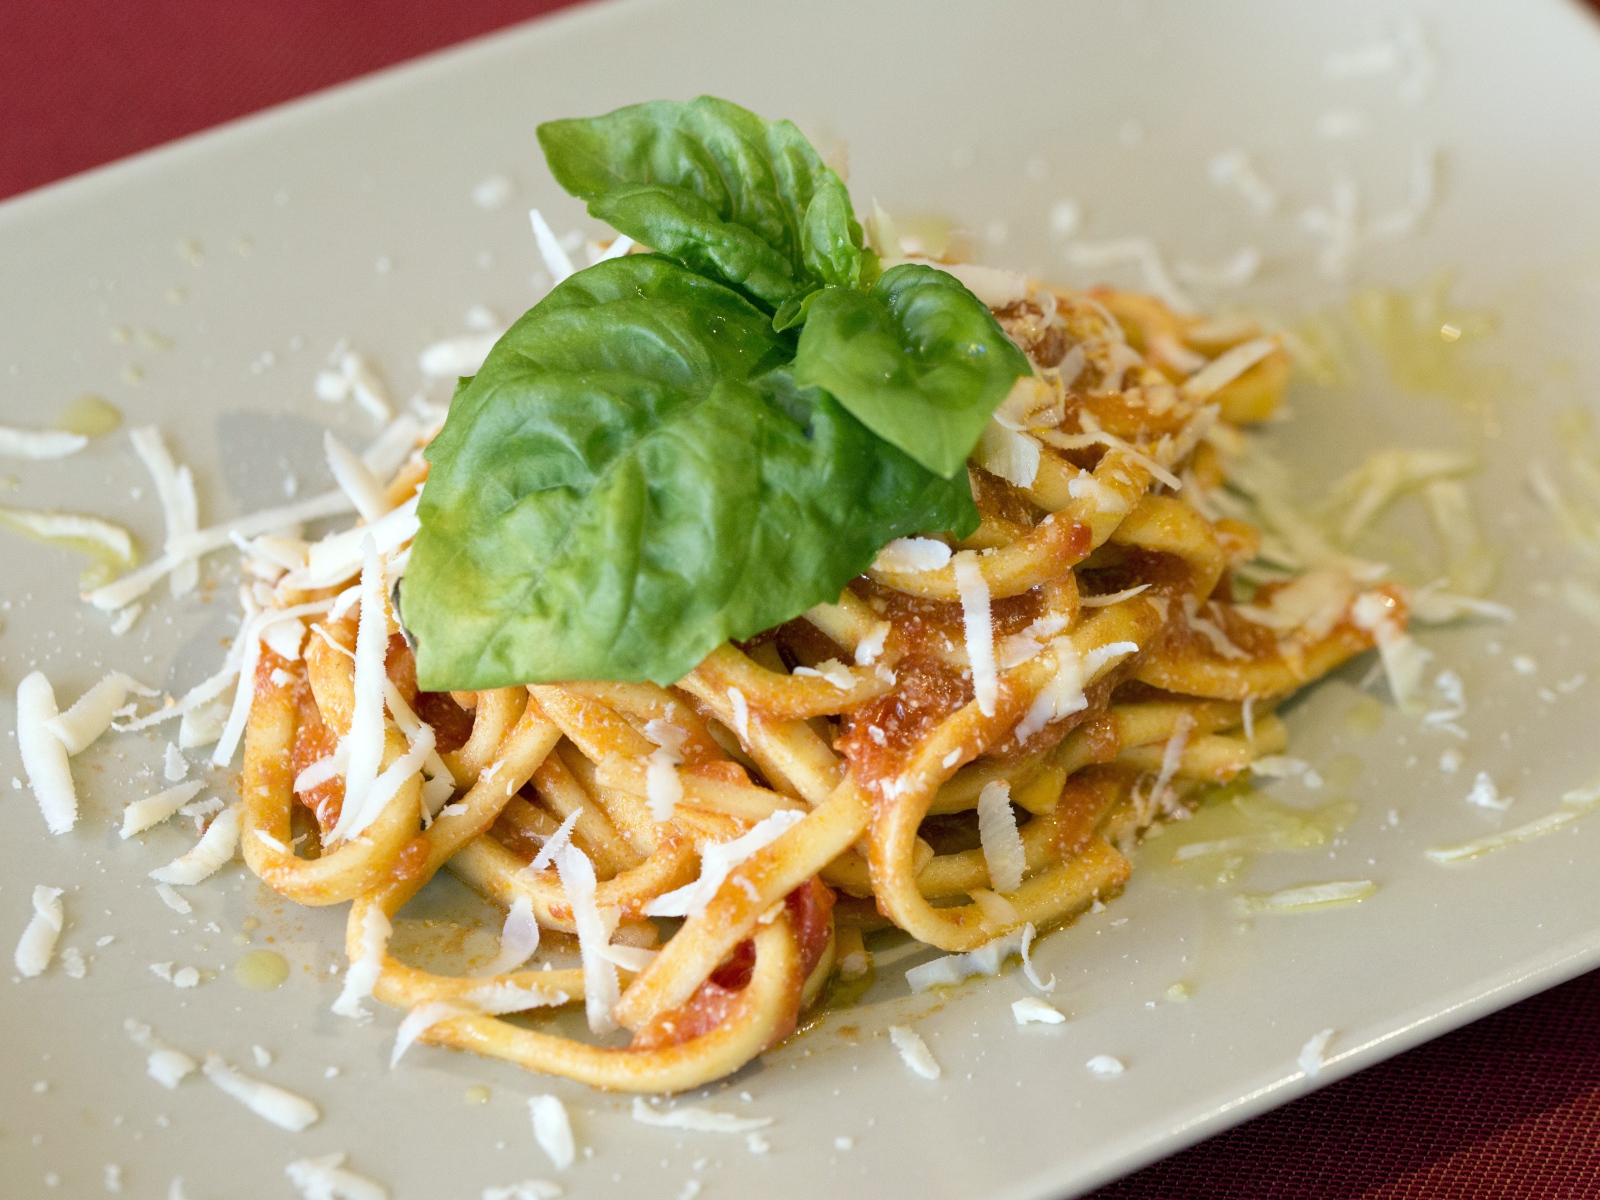 Spaghetti with cheese and basil leaves